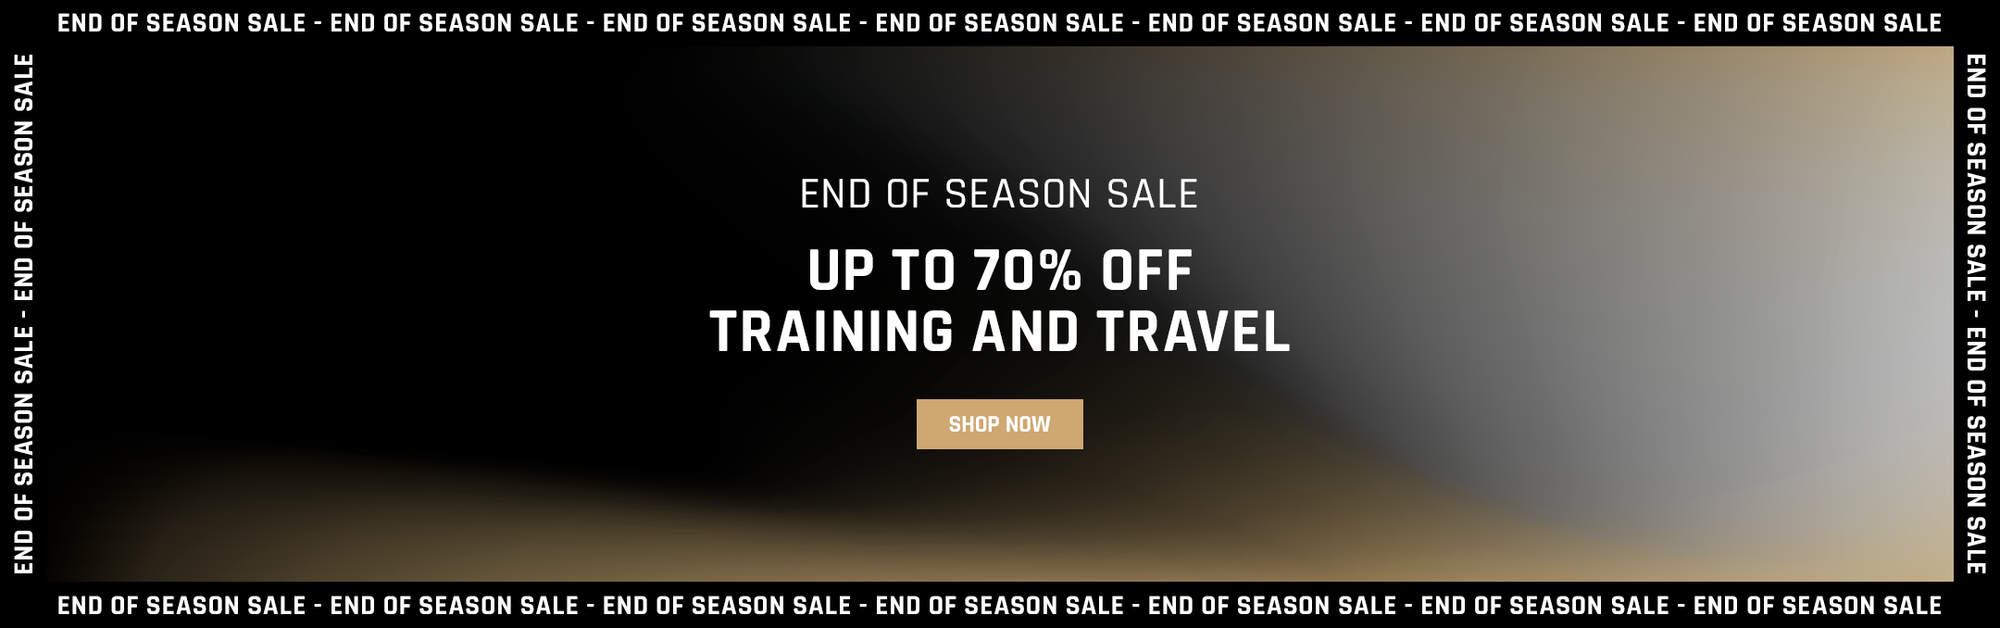 End of Season Sale - Up to 70% off Training and Travel